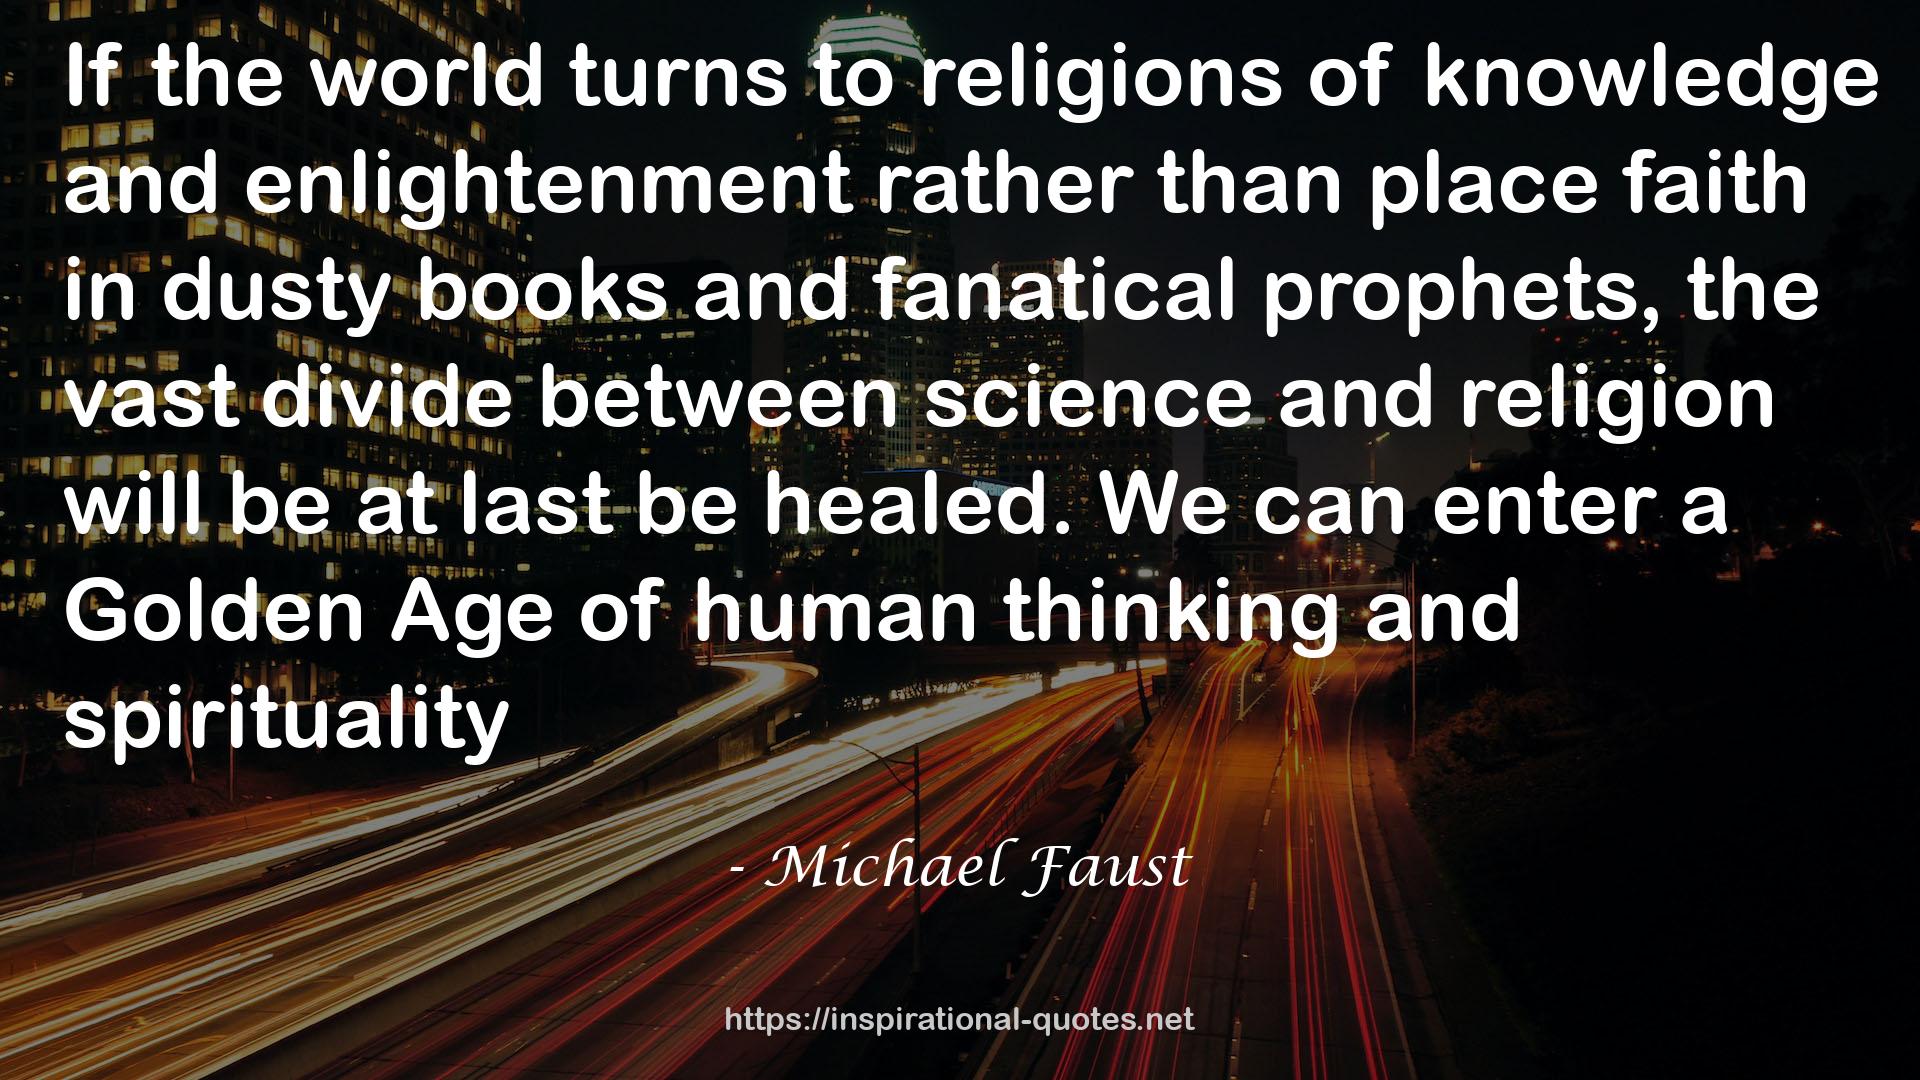 Michael Faust QUOTES